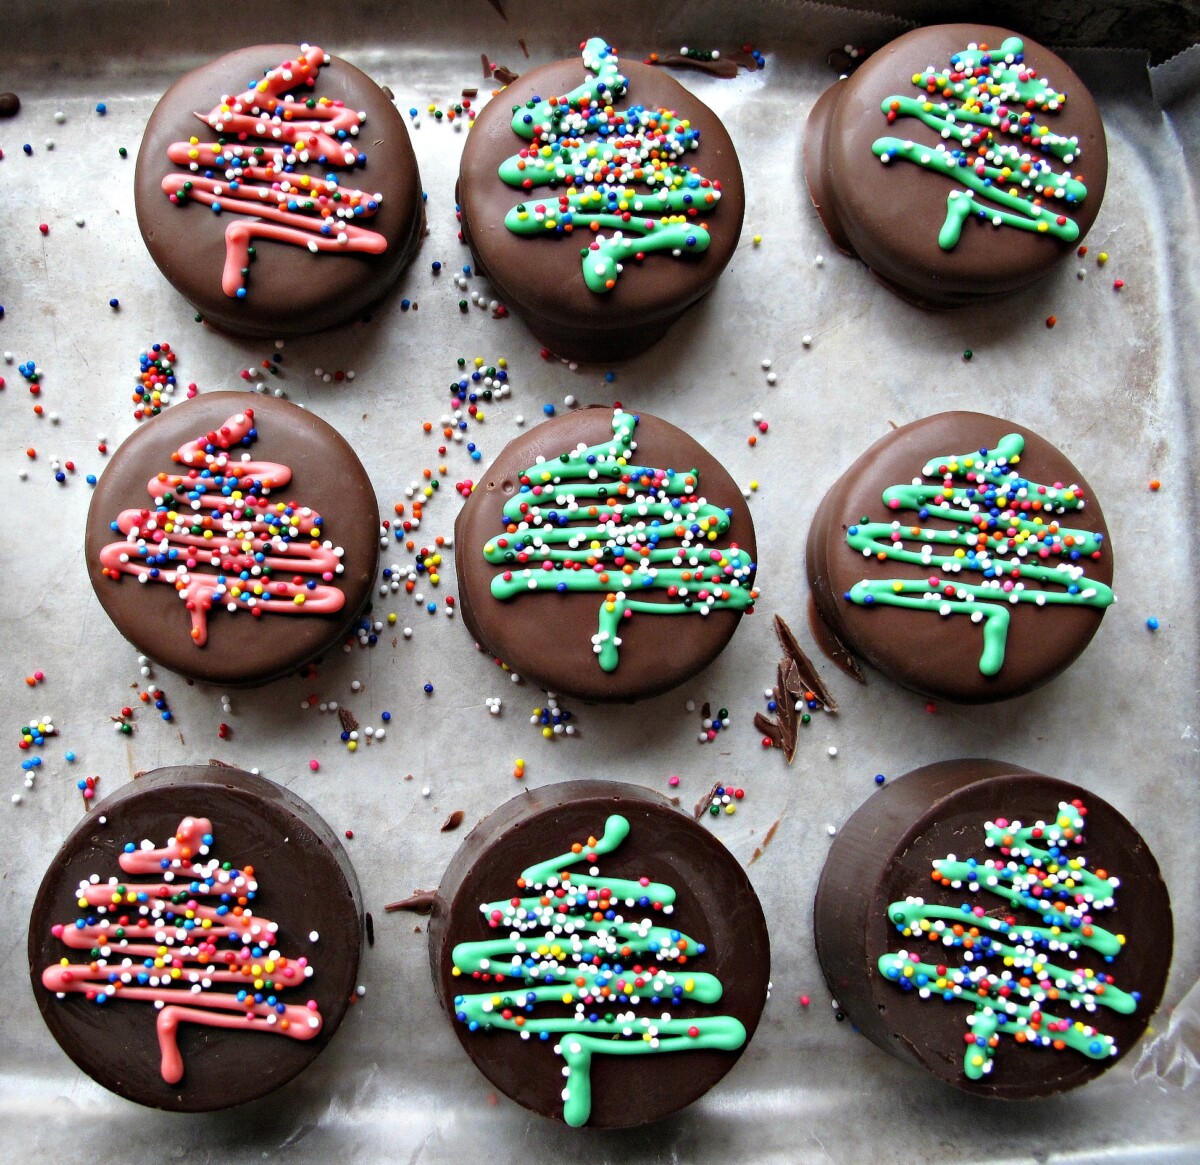 Chocolate covered oreos with a red or green zigzag Christmas tree design topped with nonpareil sprinkles.